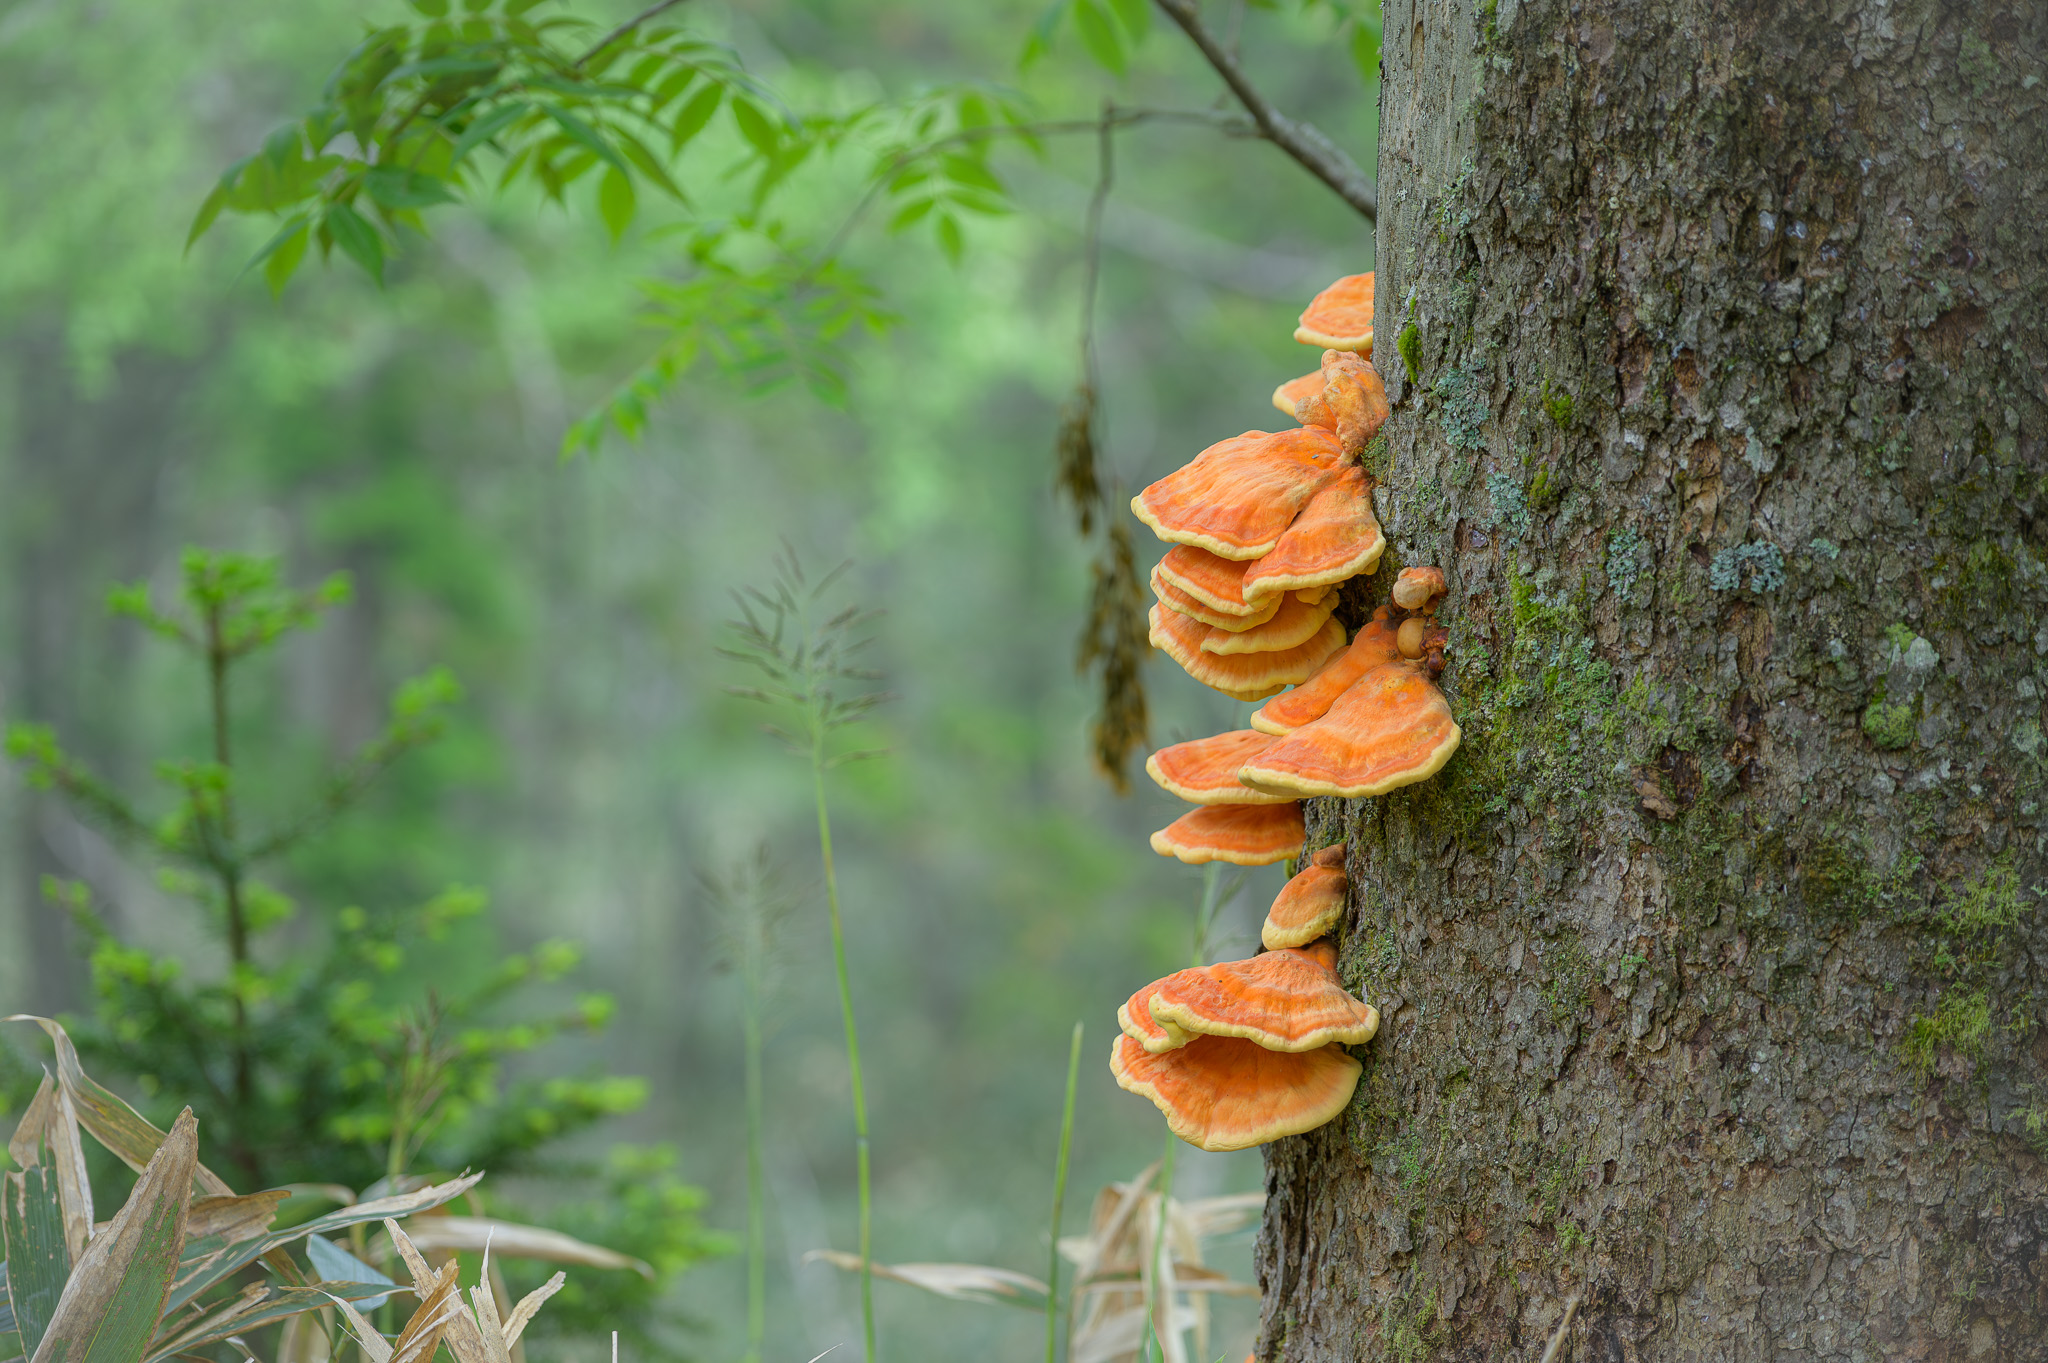 Orange mushrooms grow on the side of a spruce tree in the forests of Mt Mokoto